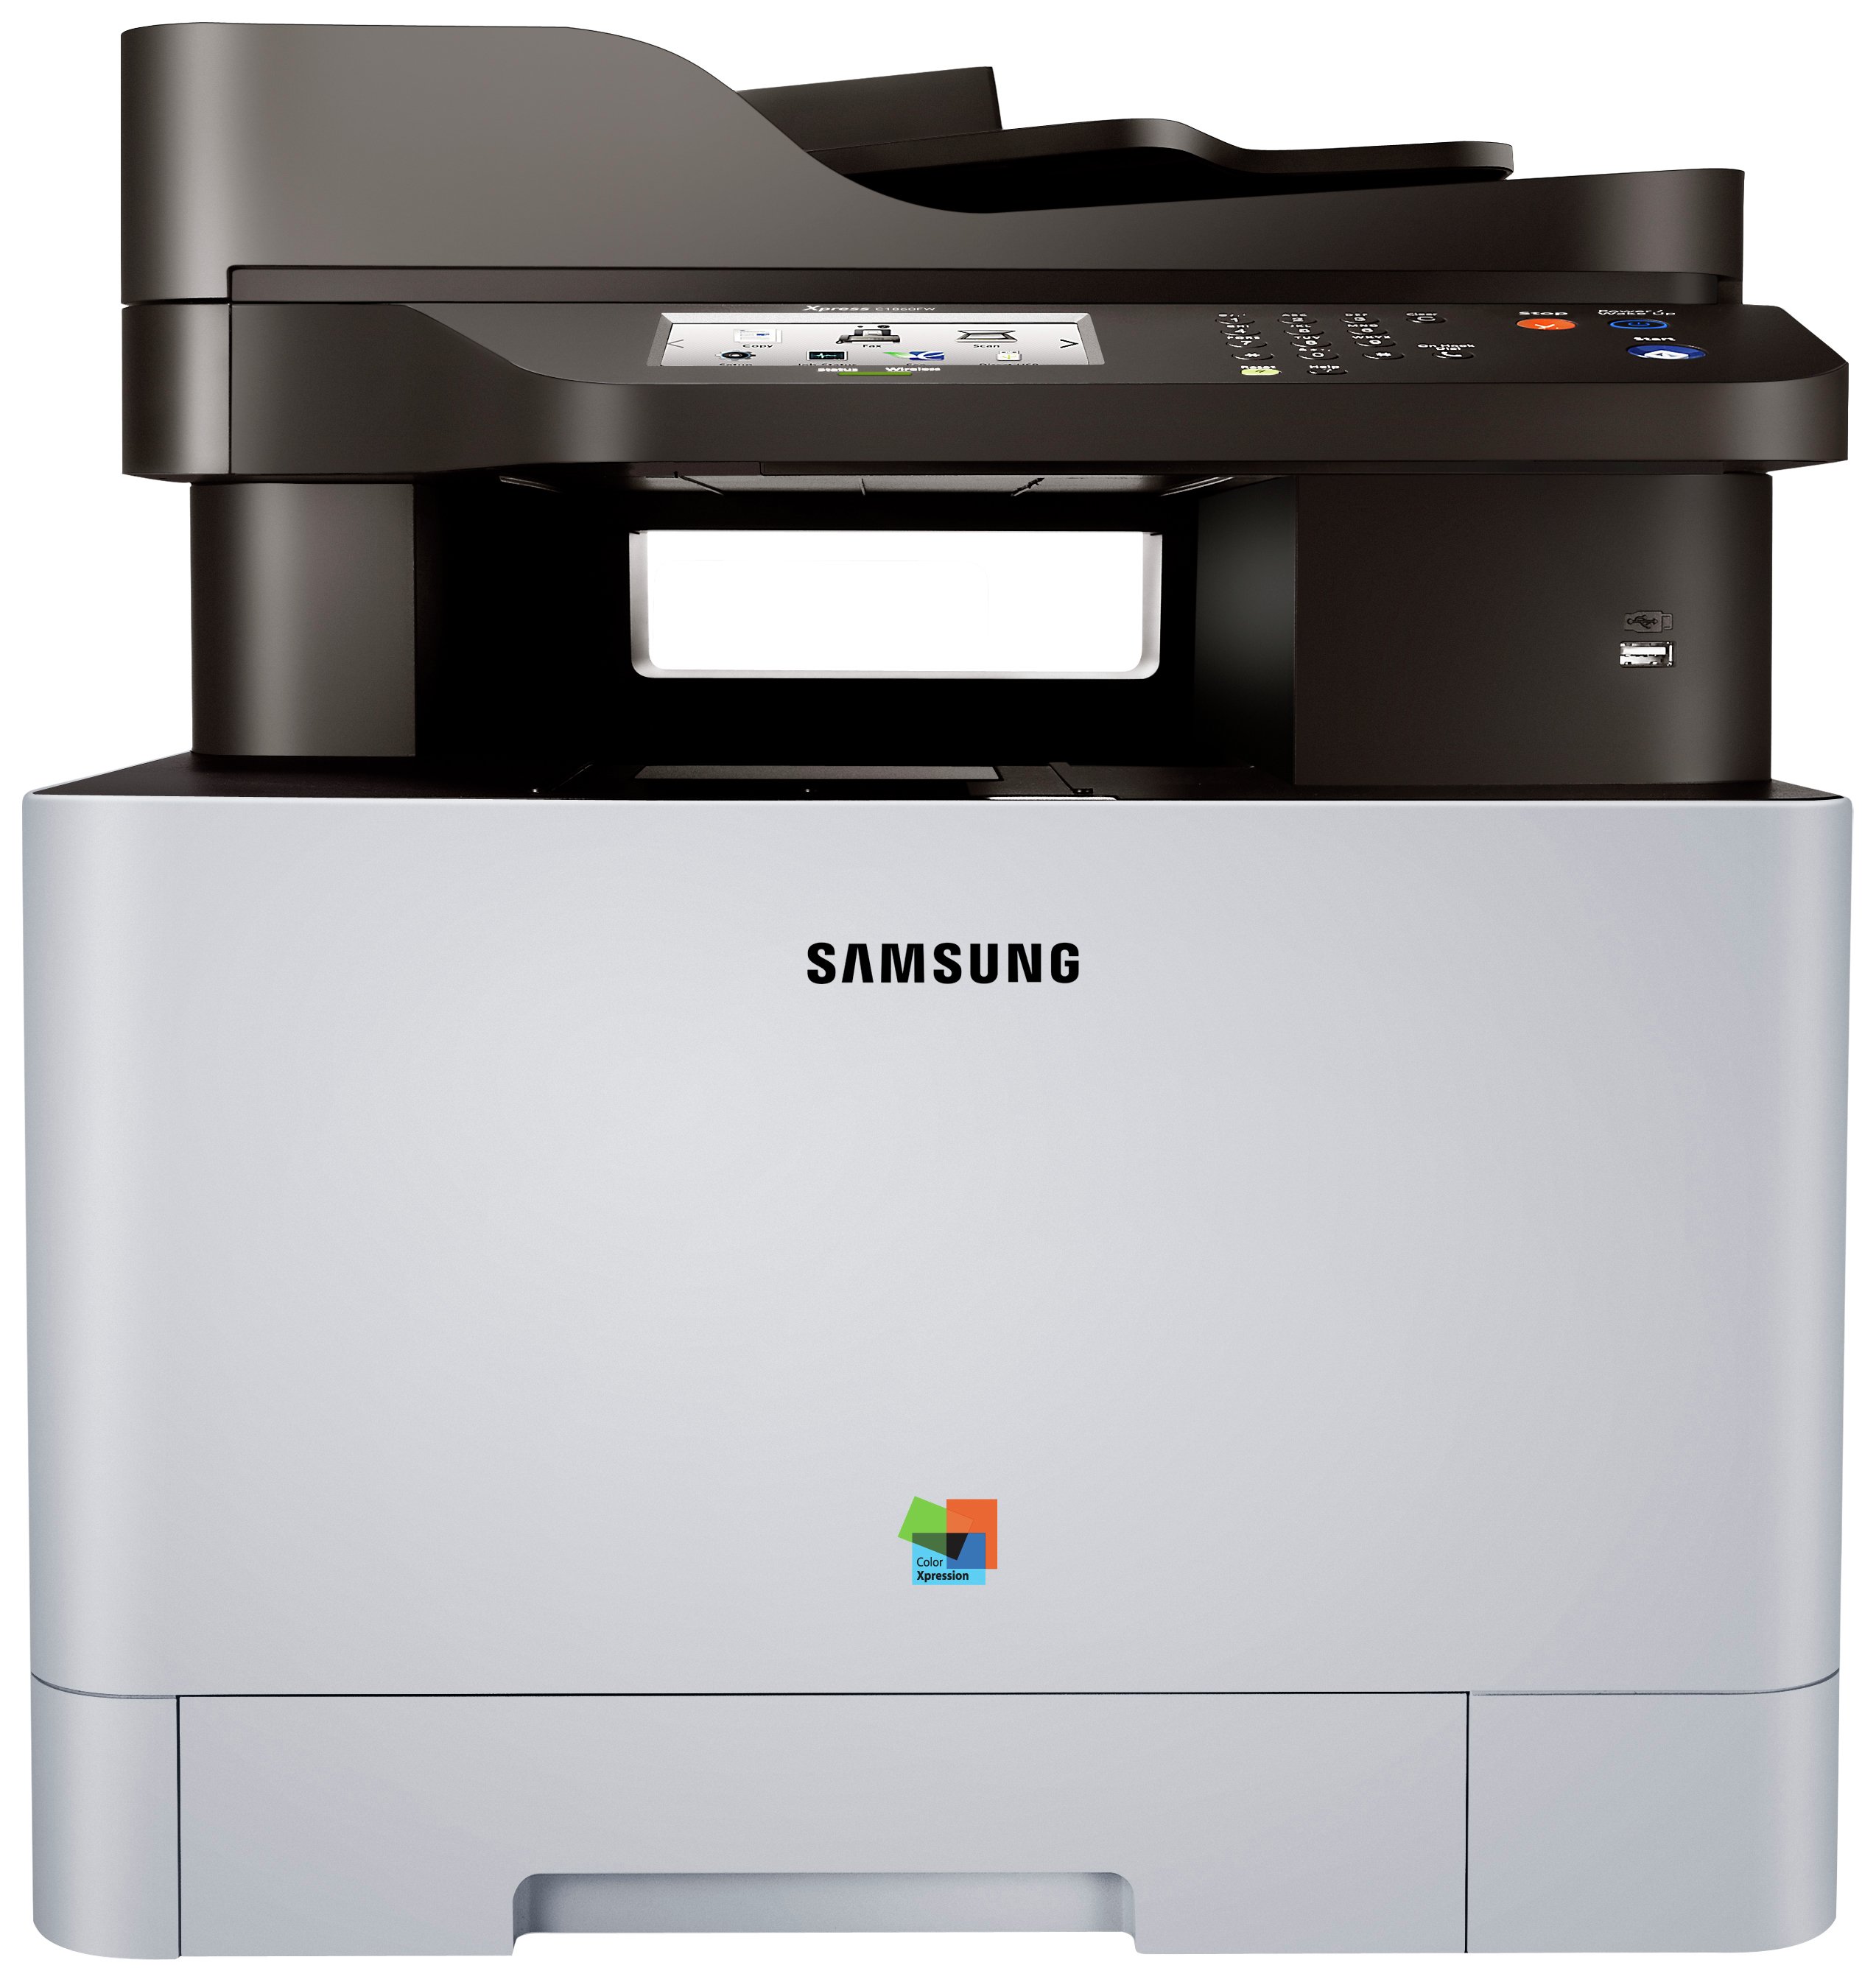 Samsung C1860FW Wireless All-in-One Colour Laser Printer